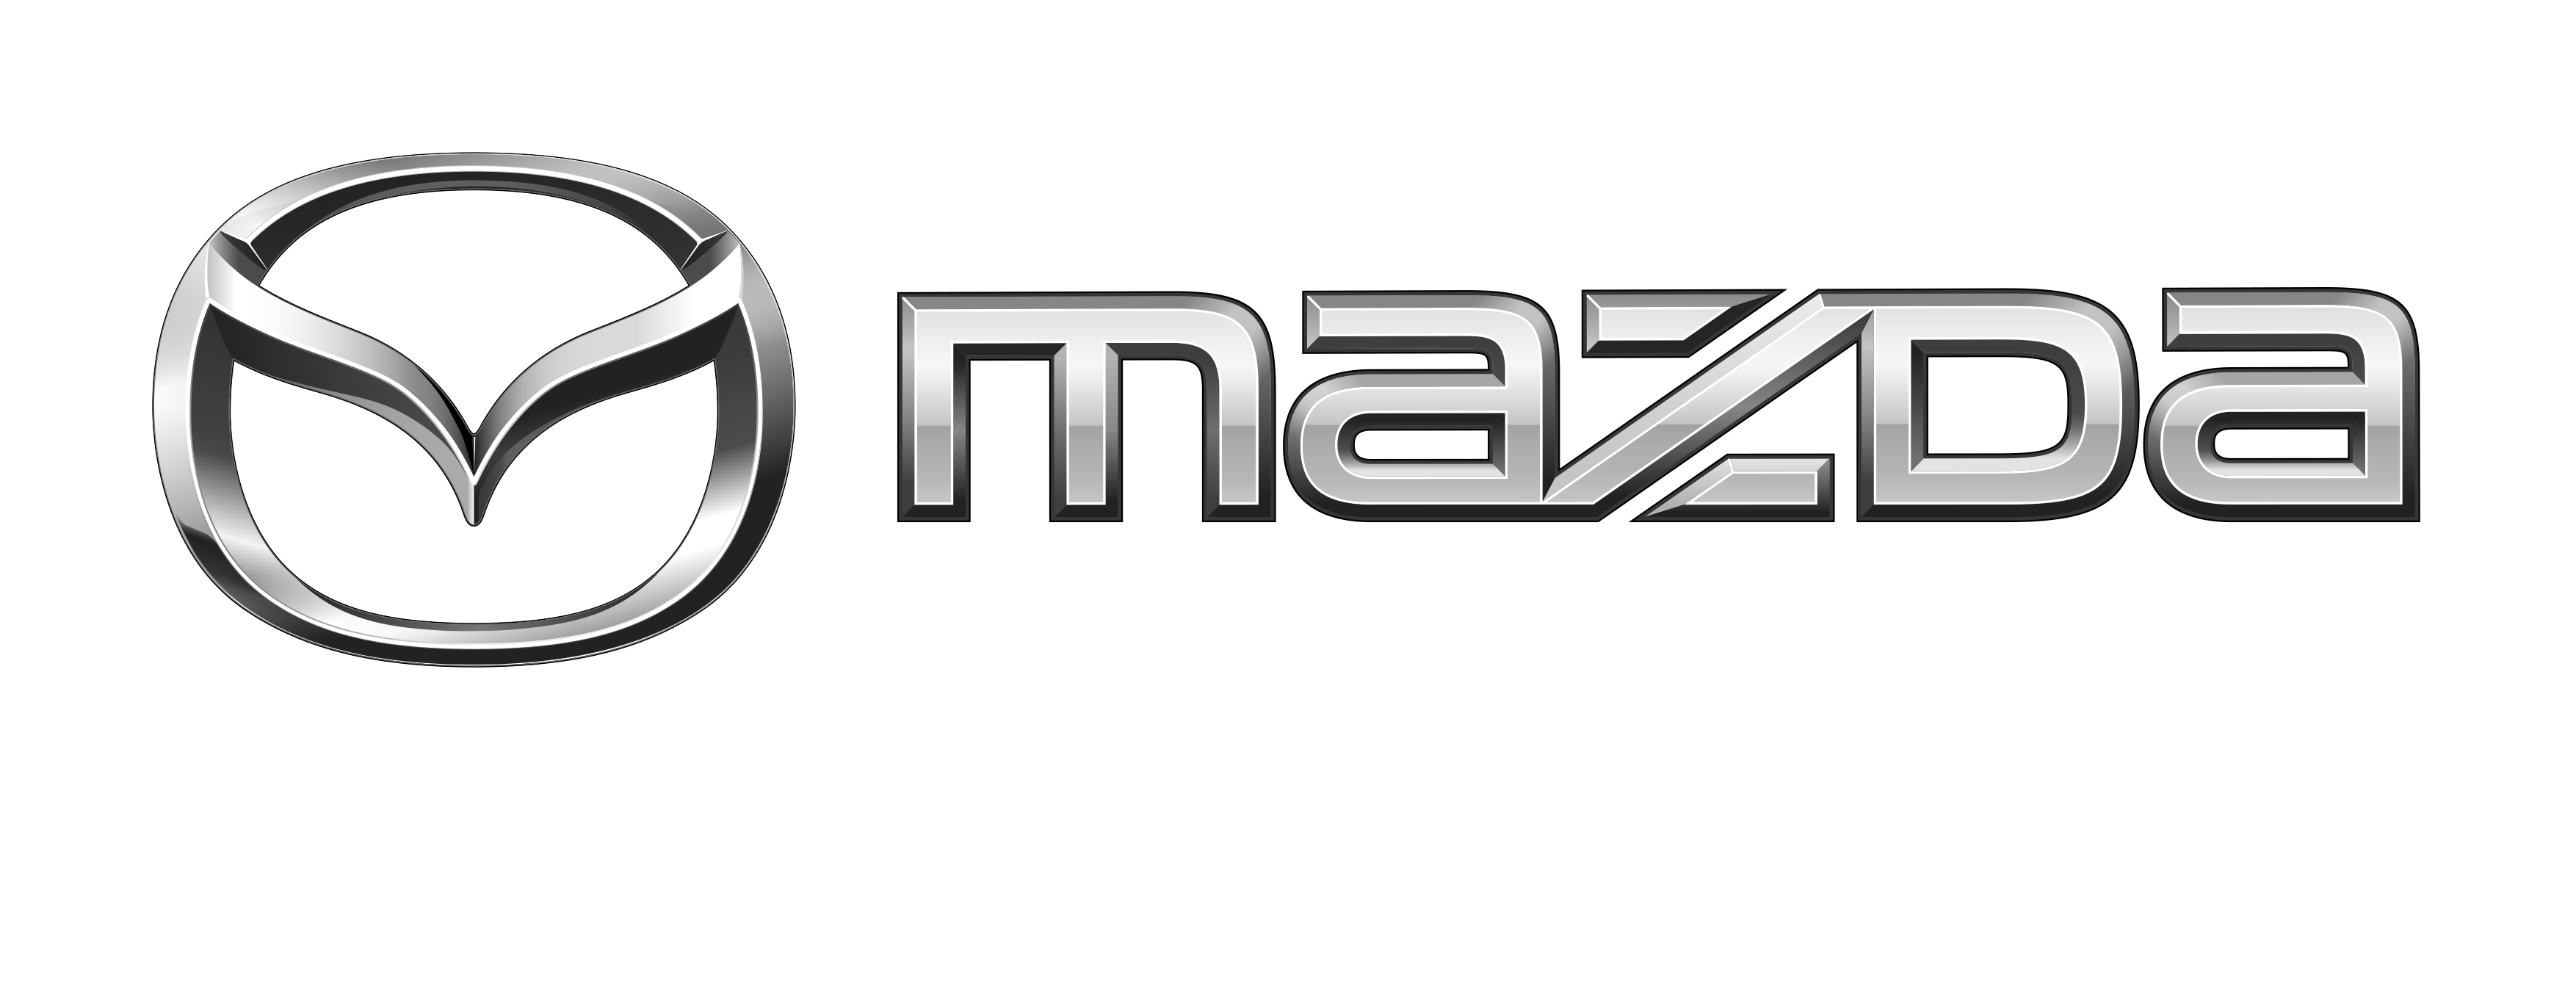 Mazda_Service_Select_Clearspace_RGB_Rev_2023.png